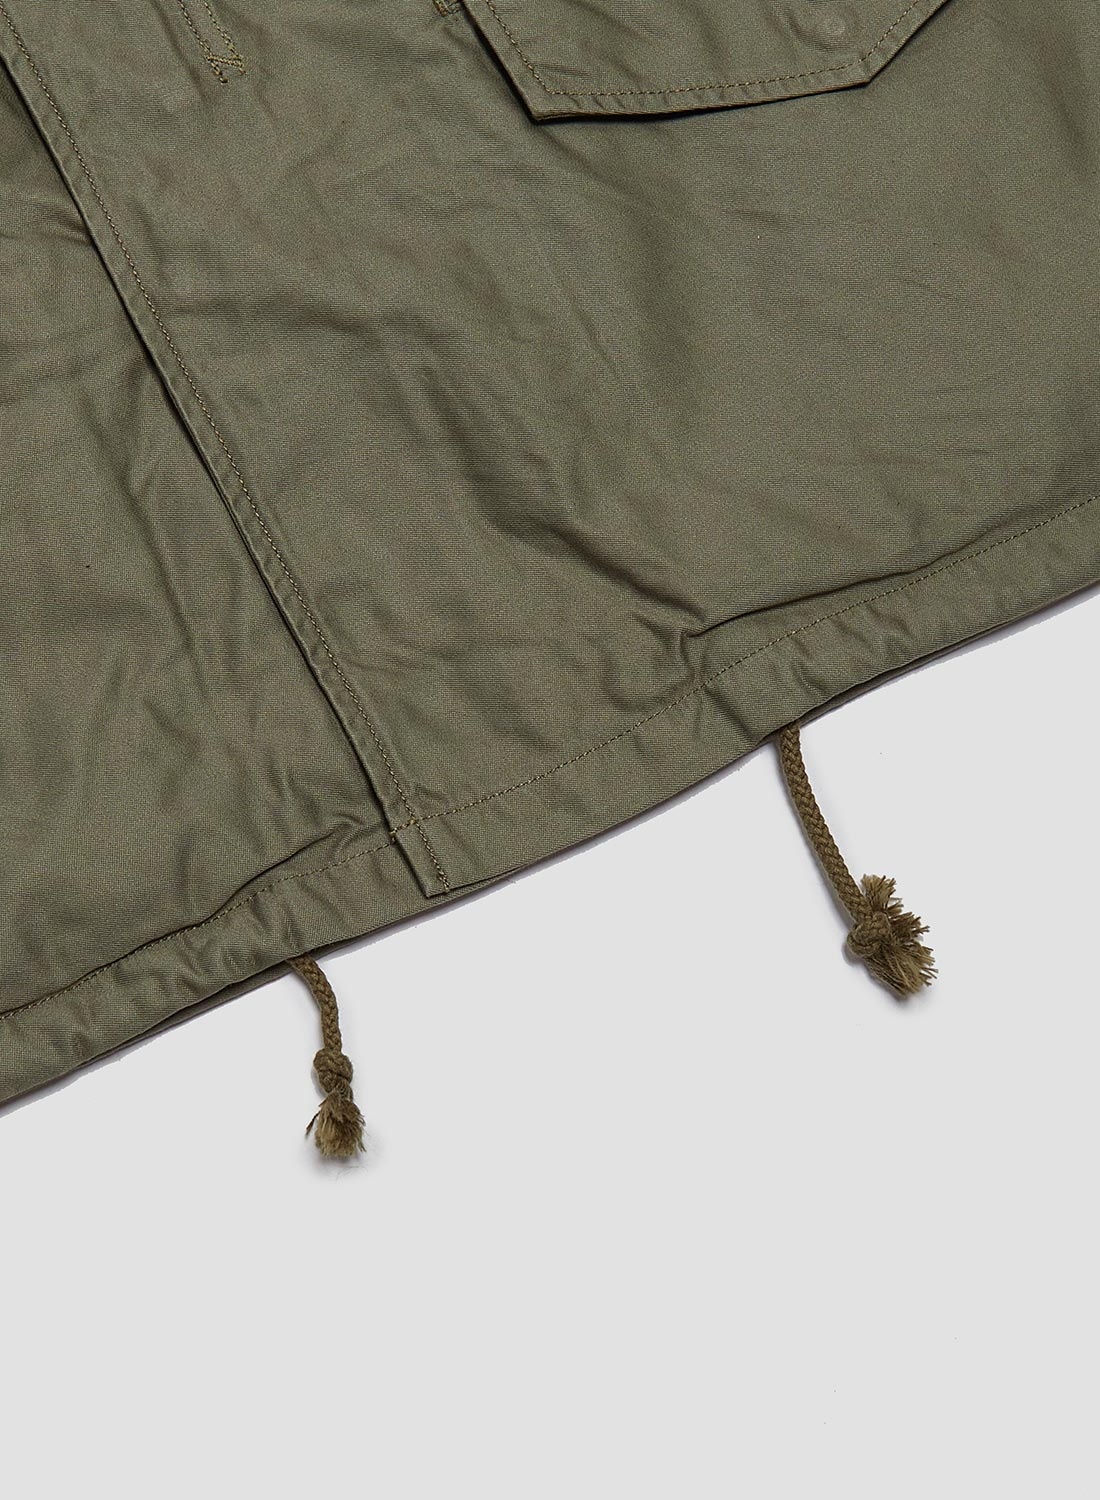 FOB Factory M-65 Field Jacket Olive - 11